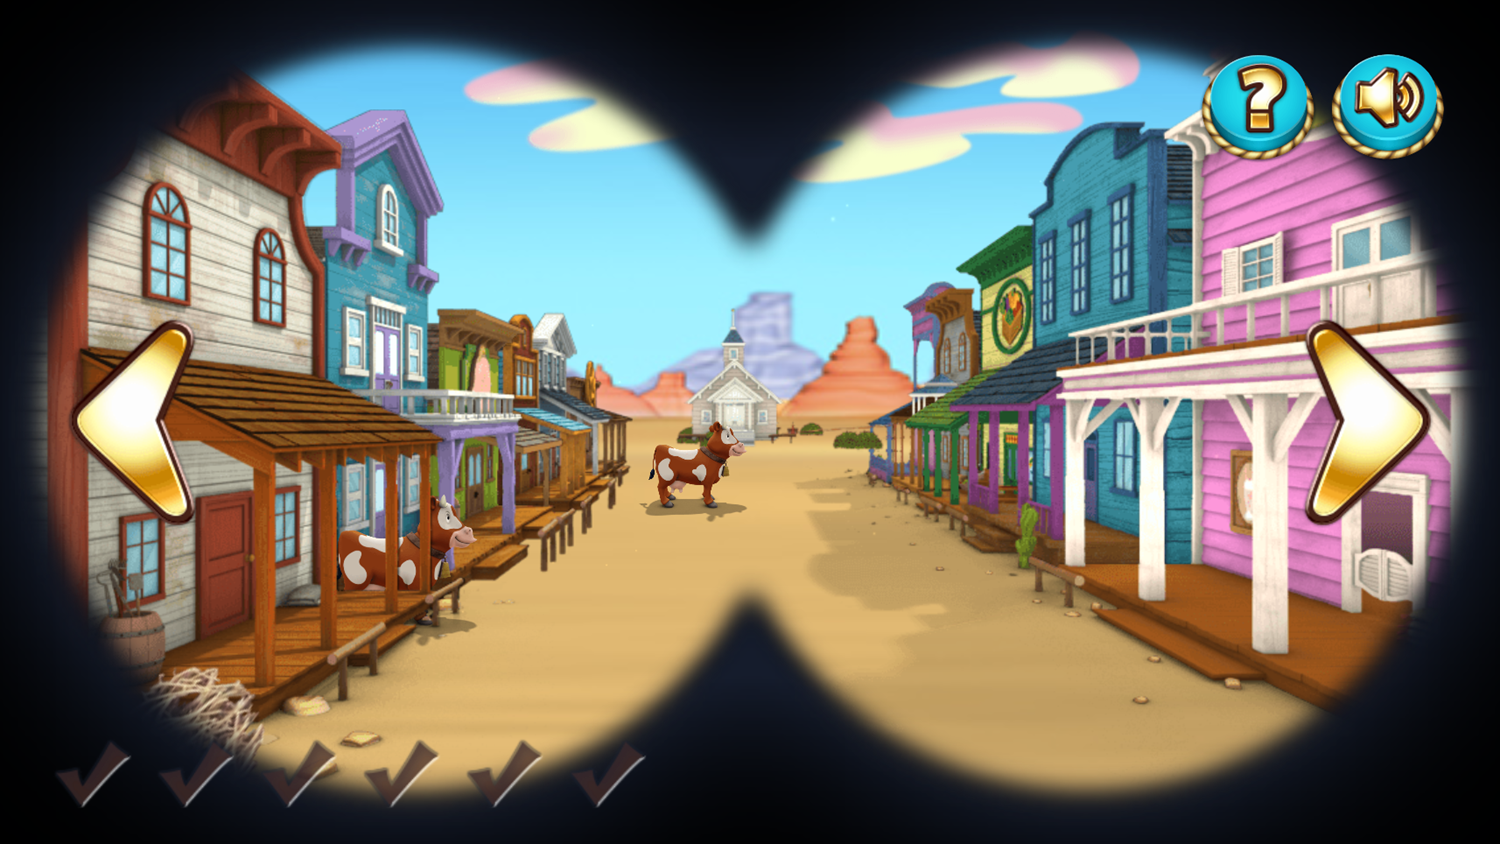 Sheriff Callie's Wild West Deputy for a Day Game Cattle Chaos Start Screenshot.